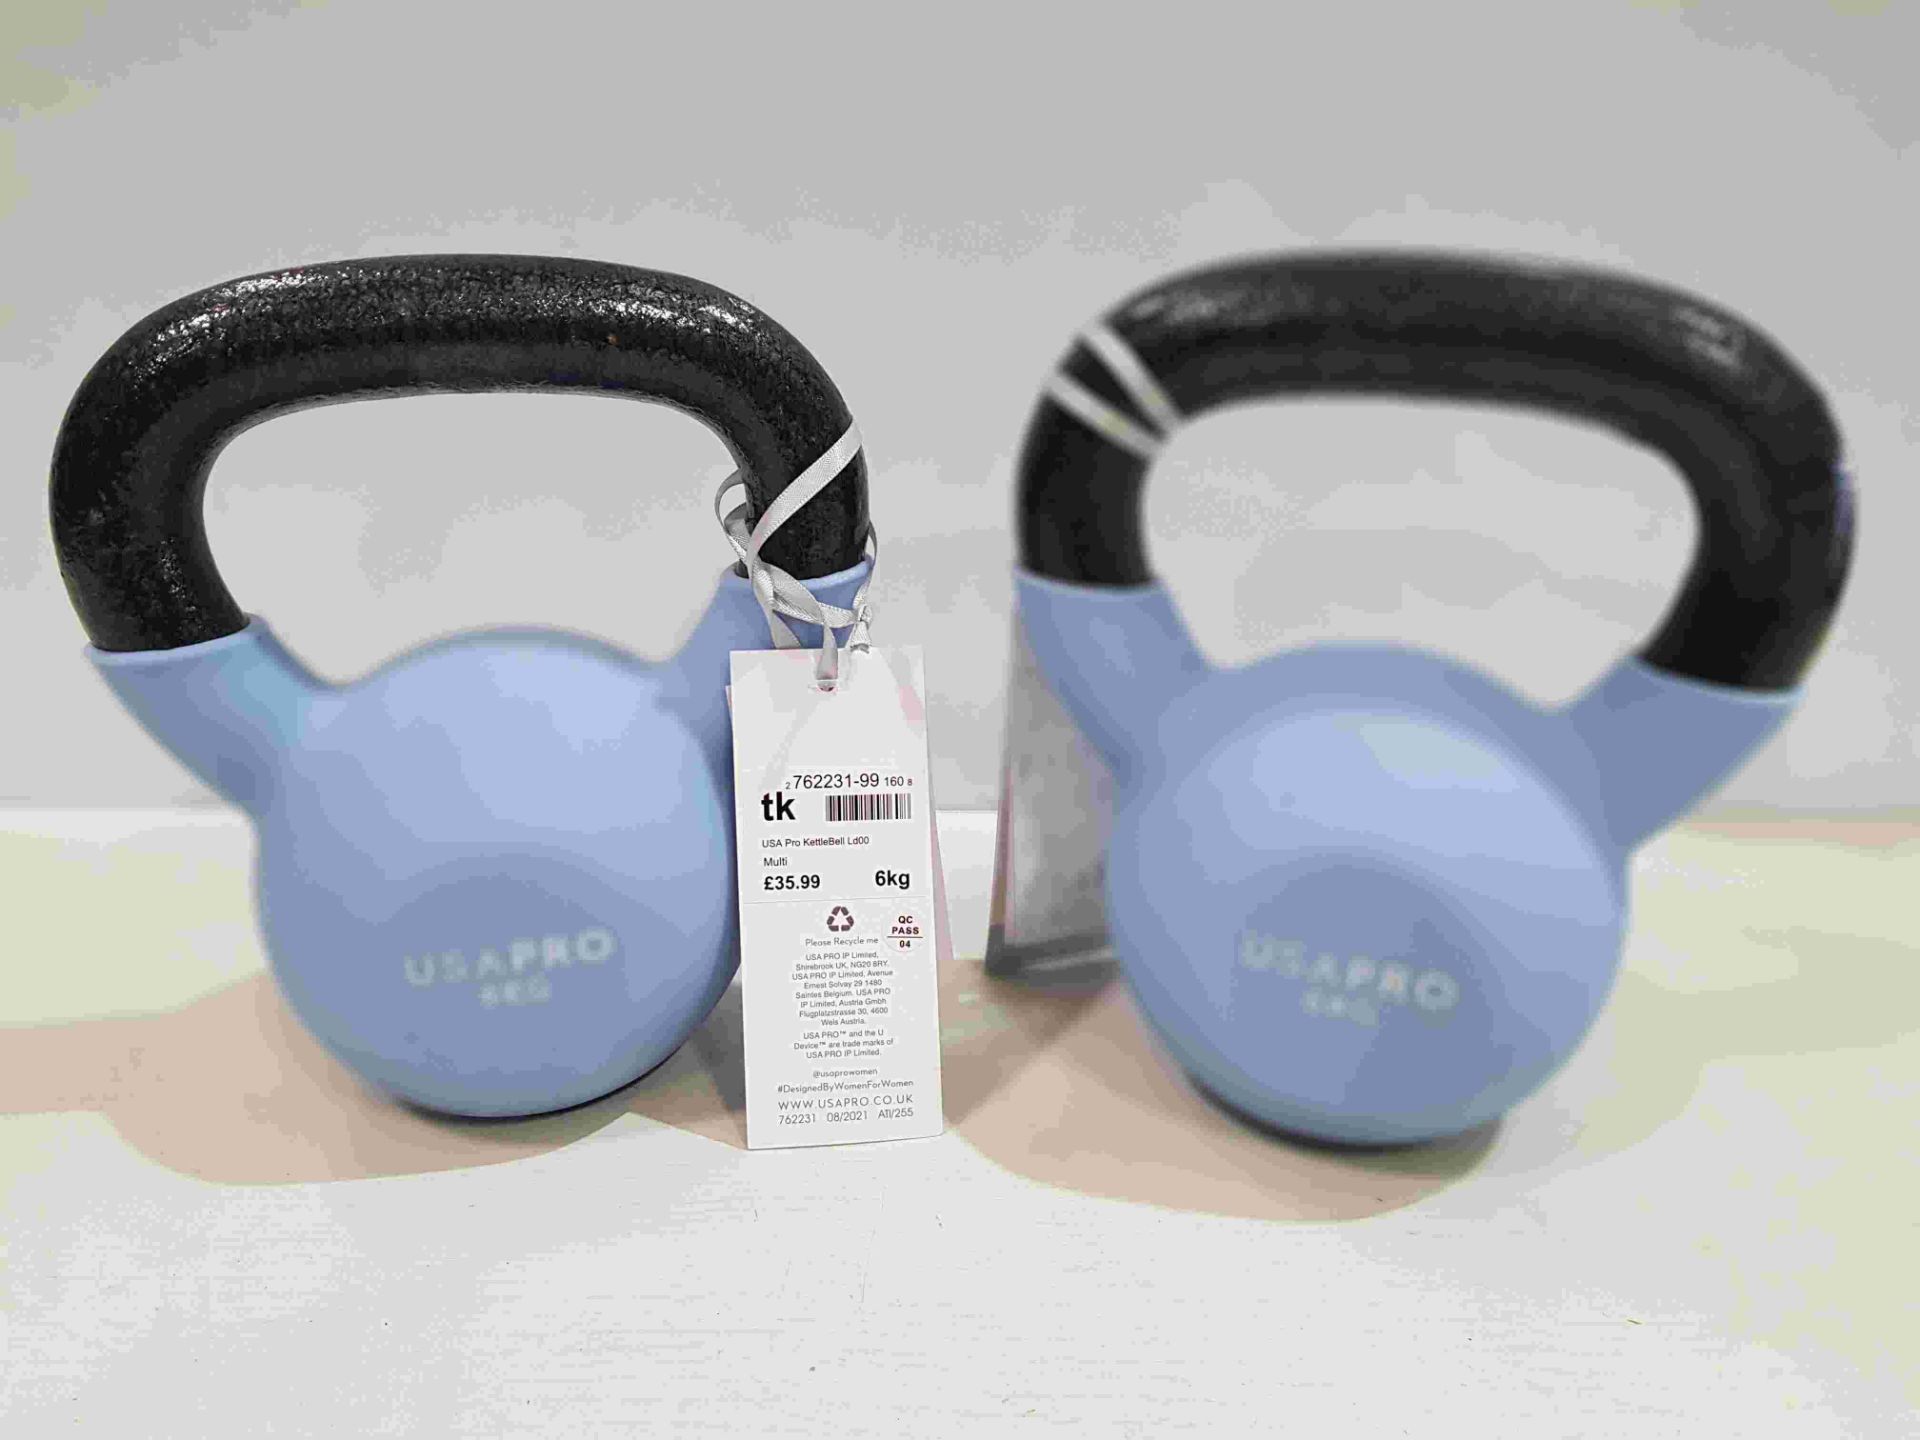 20 X BRAND NEW USA PRO 6KG KETTLE BELLS (10 PAIRS) RRP-£35.99 PP - RRP £ 71.98 FOR PAIR - TOTAL